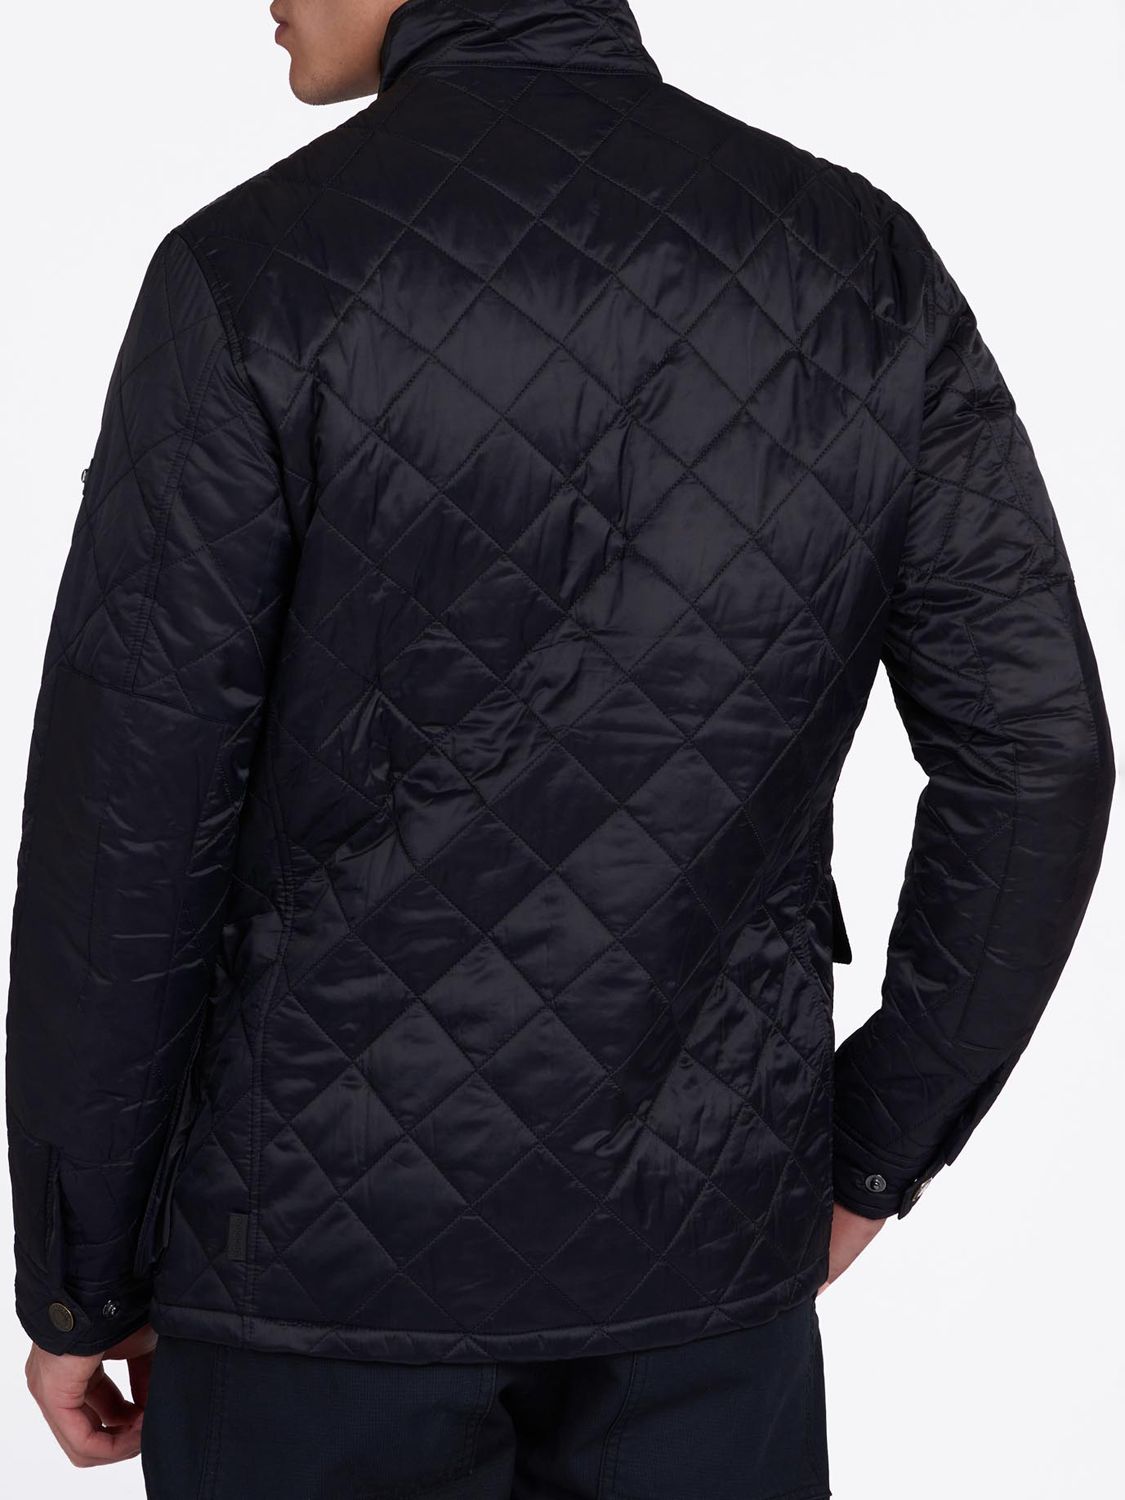 Barbour Ariel Profile Quilted Jacket, Navy at John Lewis & Partners